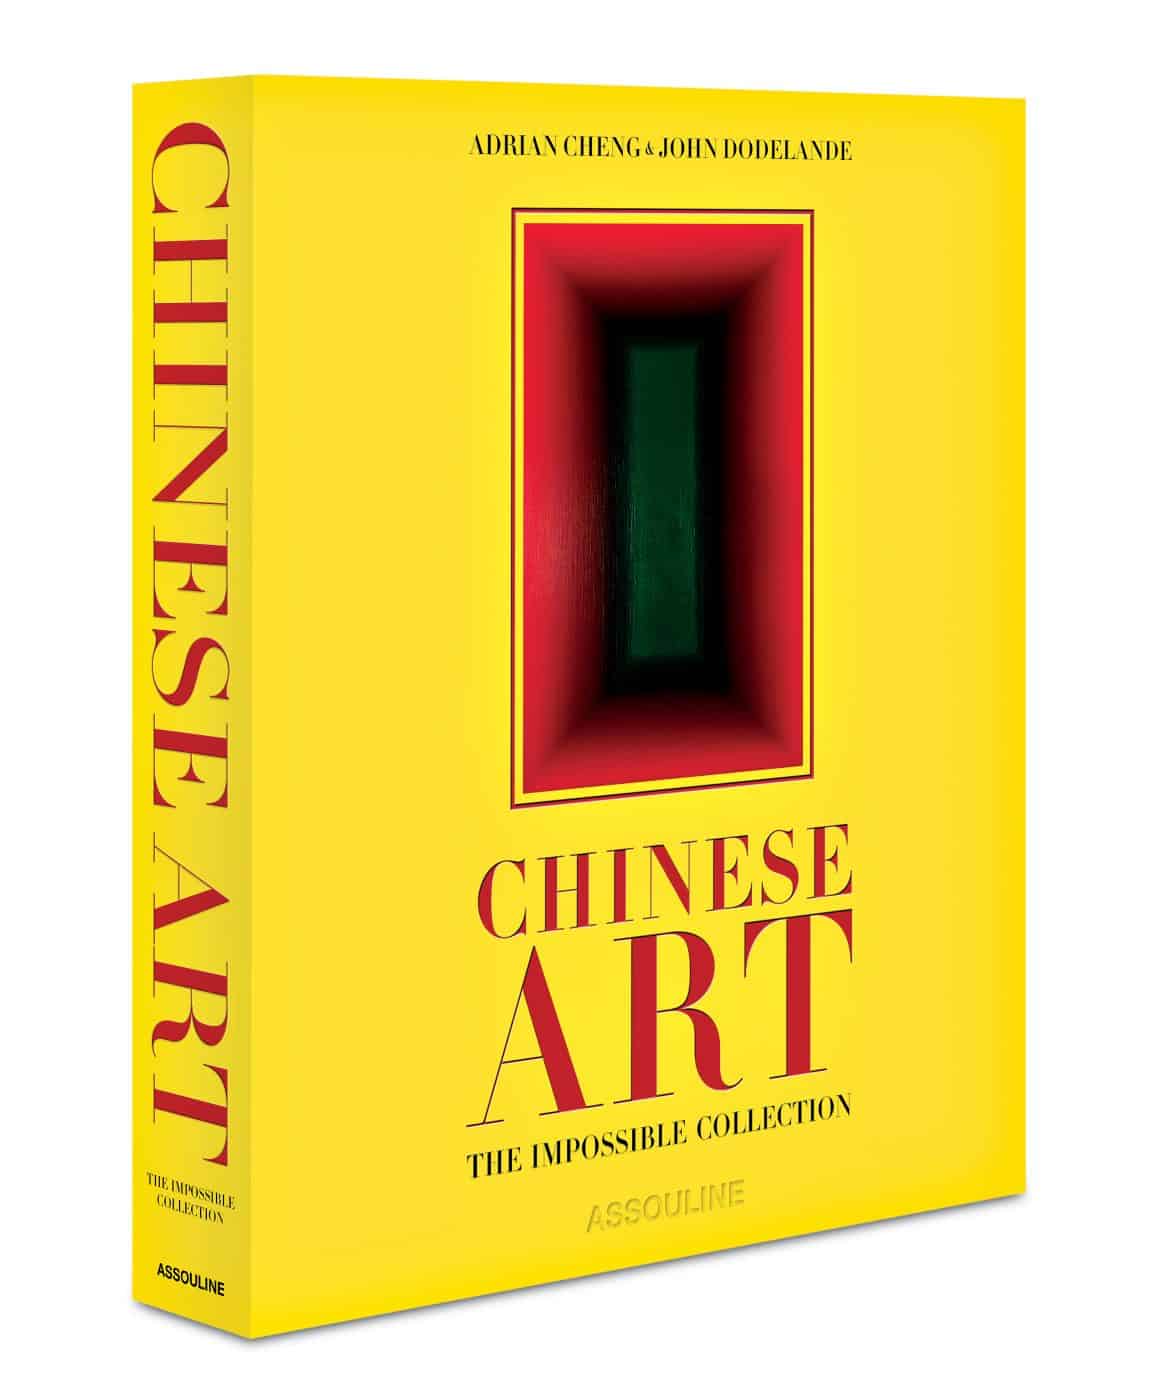 Photo of the cover of Chinese Art The Impossible Collection